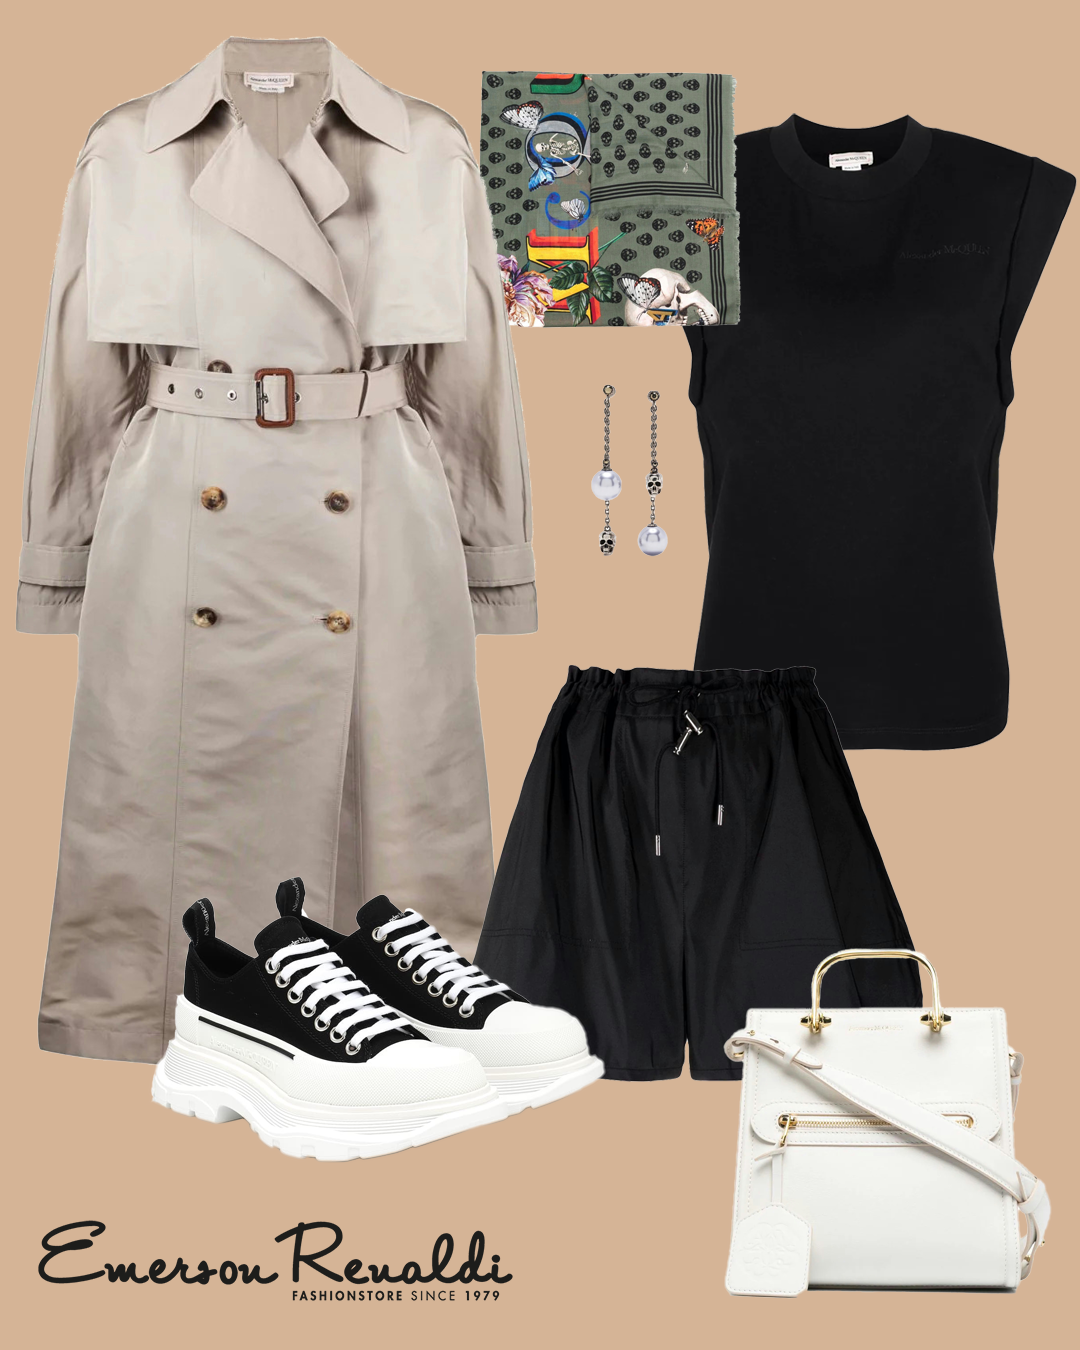 What to wear now - Transitional weather edition